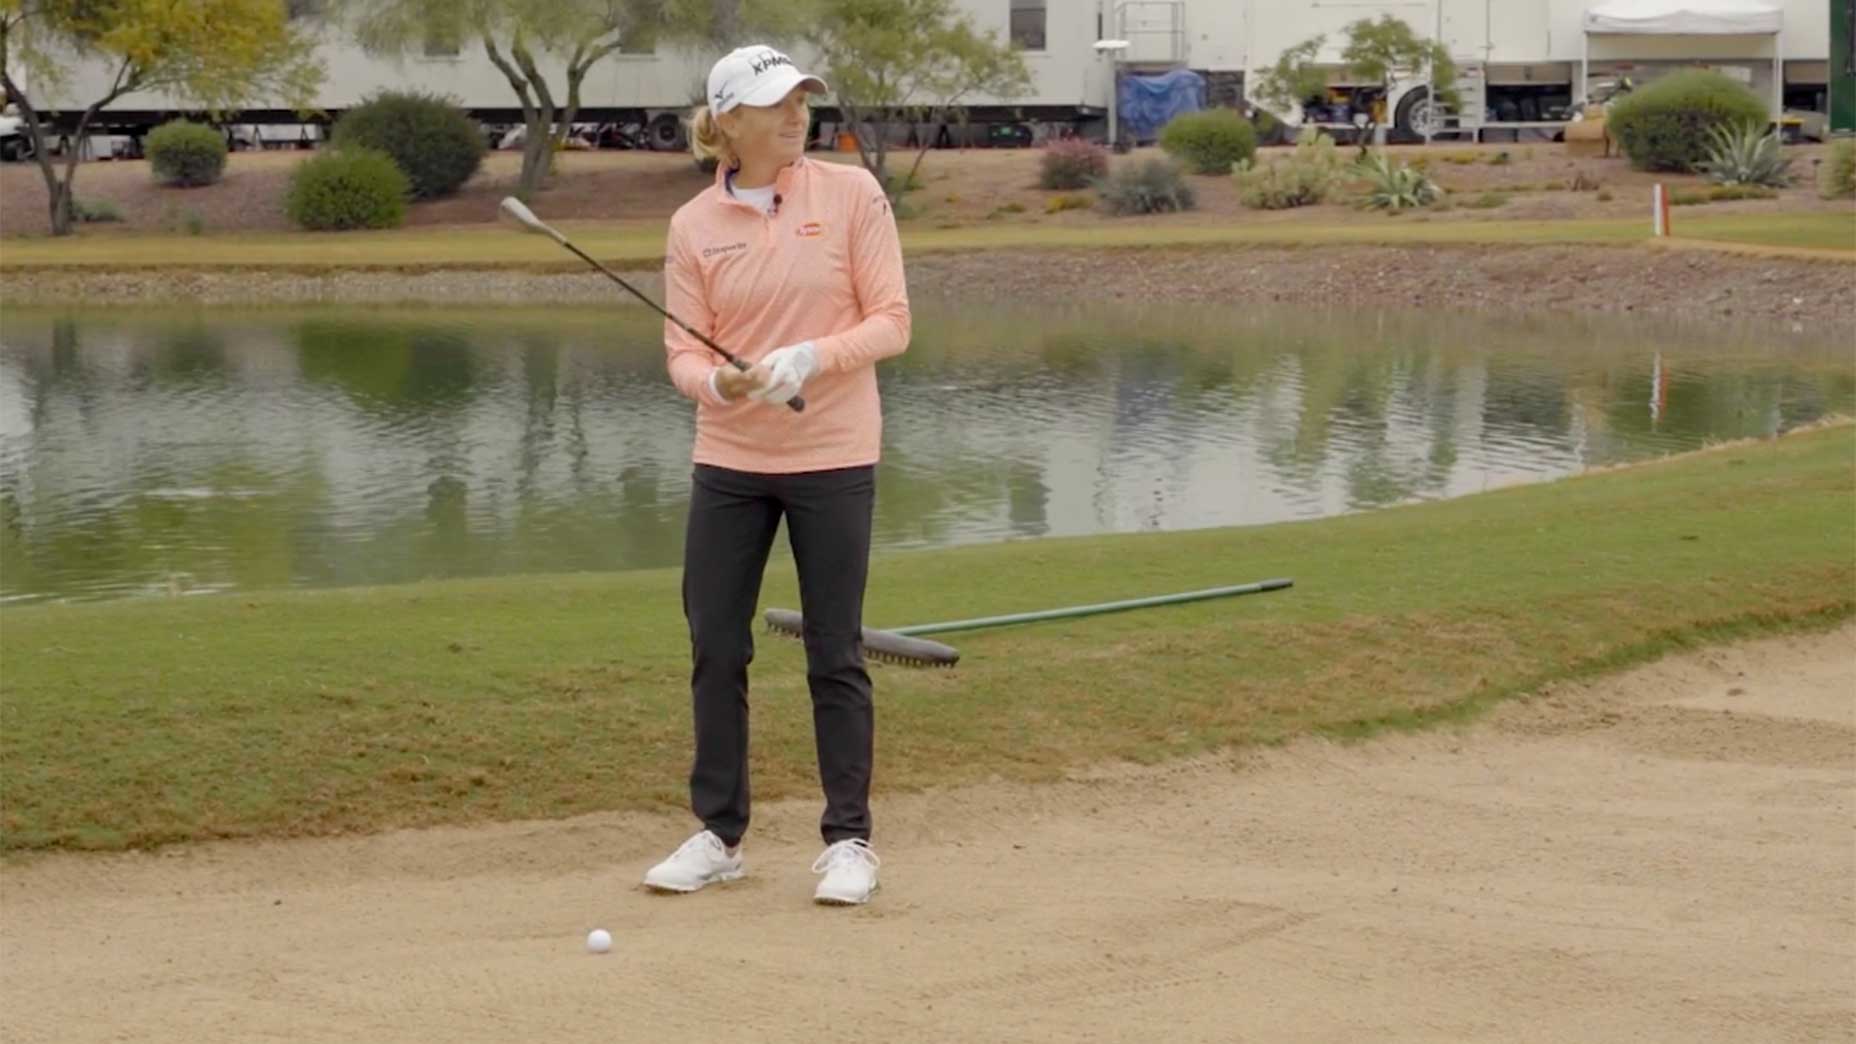 stacy lewis hits from the bunker